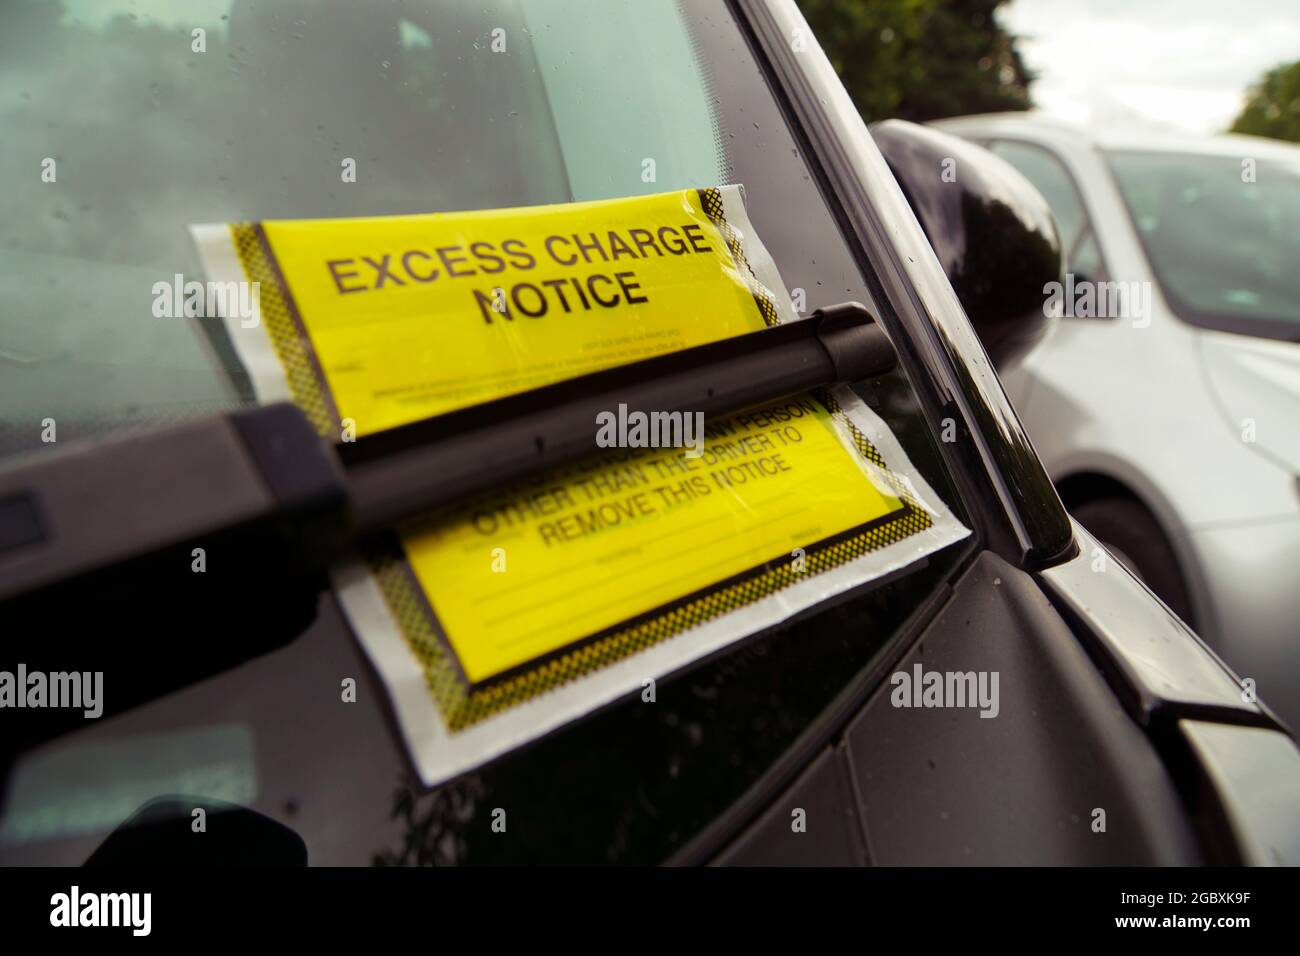 London, UK, 5 August 2021: A parking penalty notice on a car in London. While more people have spurned public transport since the coronavirus pandemic began, local councils are keen to avoid congestion and parking restrictions are one way of discouraging motorists. Anna Watson/Alamy Stock Photo